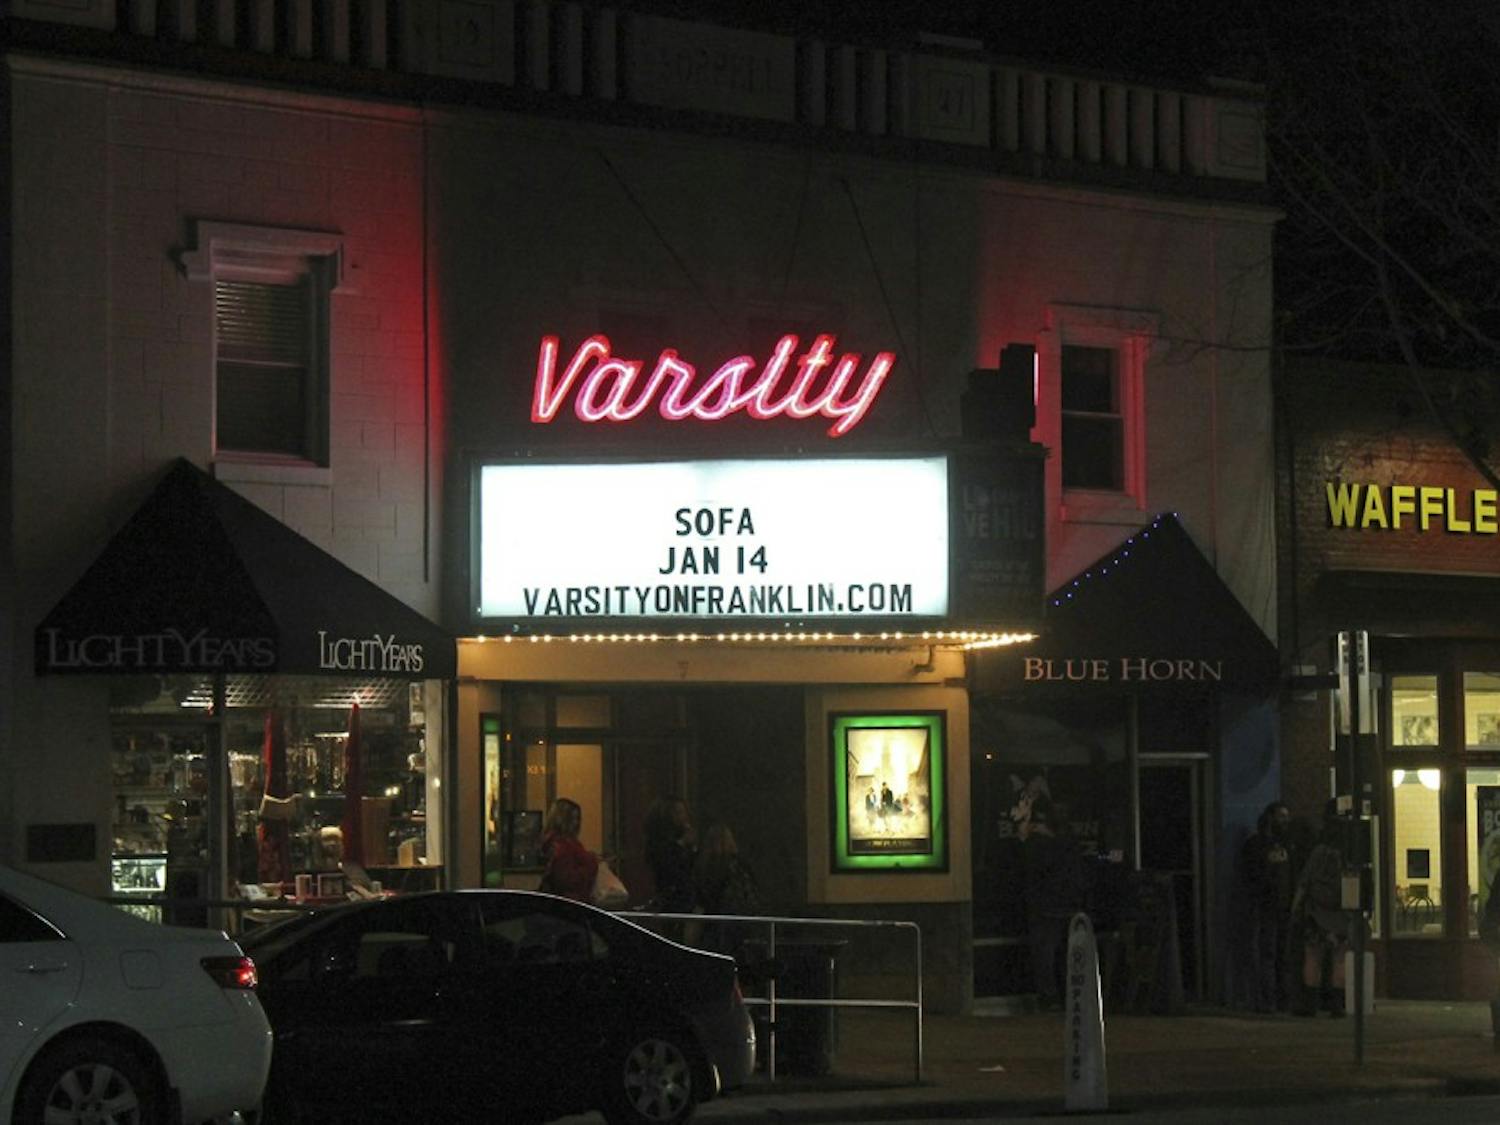 The Varsity Theatre is hosting a viewing party for the UNC-Duke game